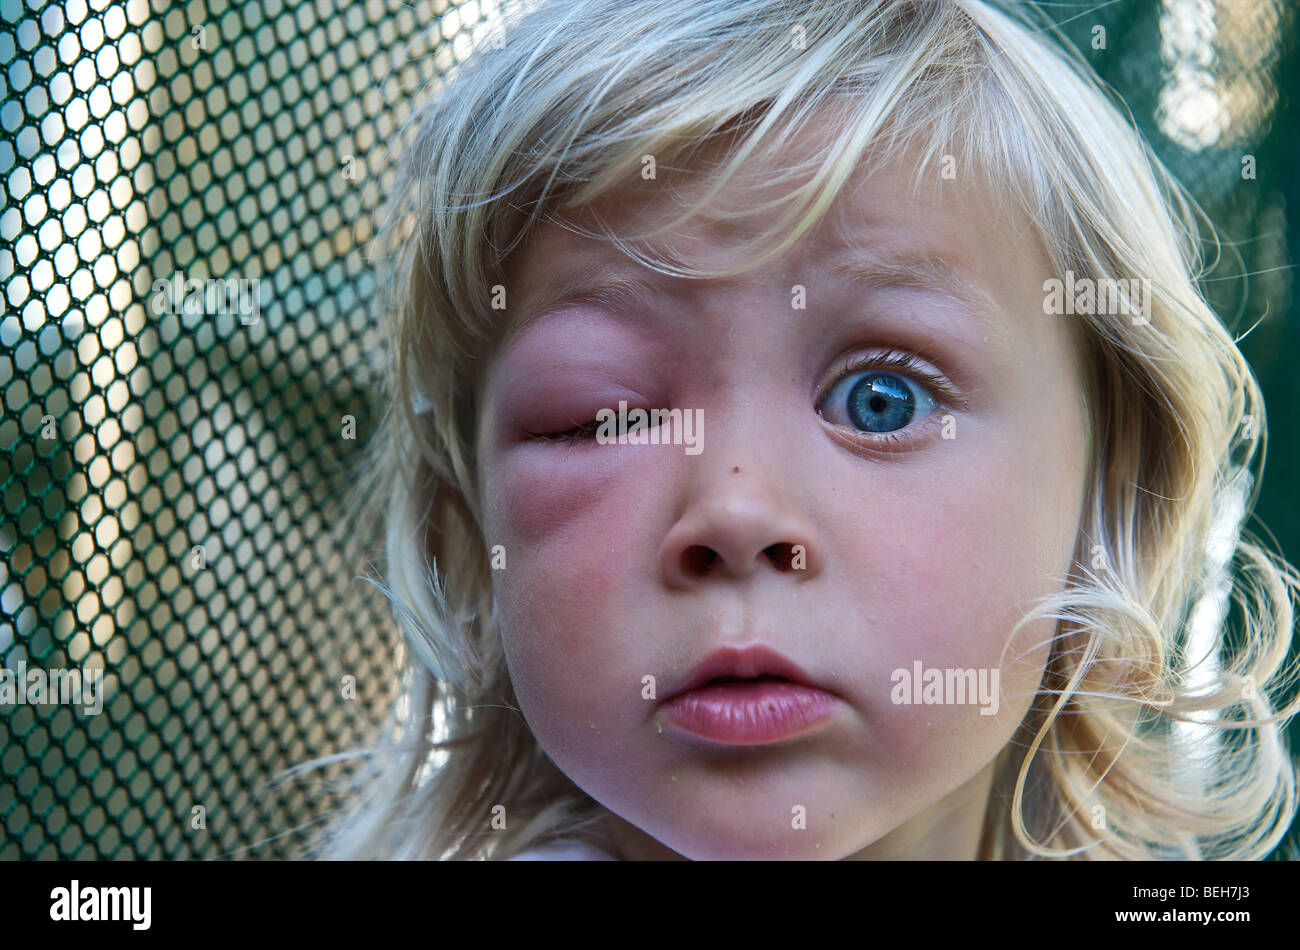 4 year old girl with a swollen eye from a wasp's sting Stock Photo